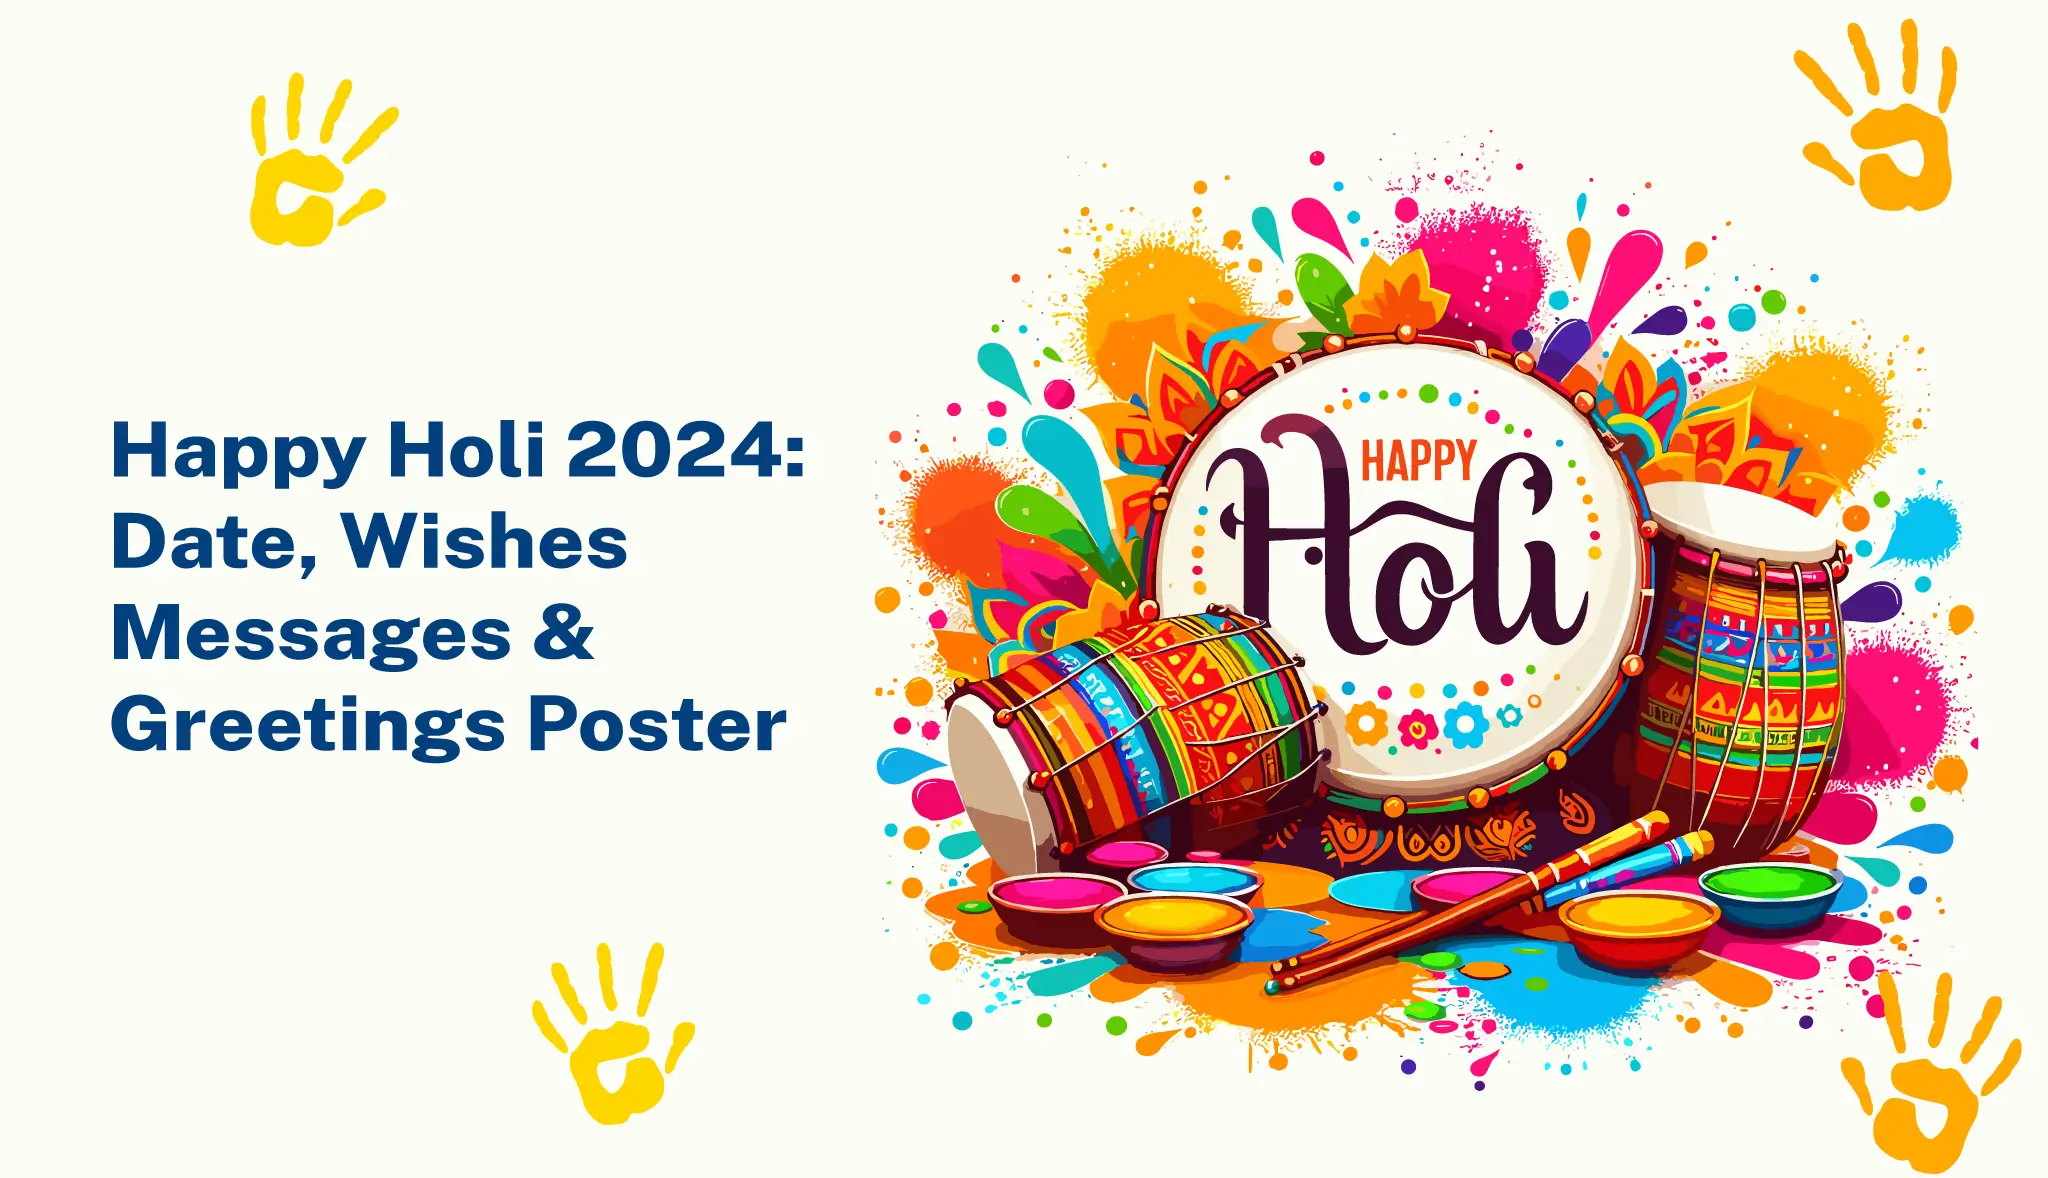 Happy Holi 2024 Date, Wishes Messages & Greetings Poster